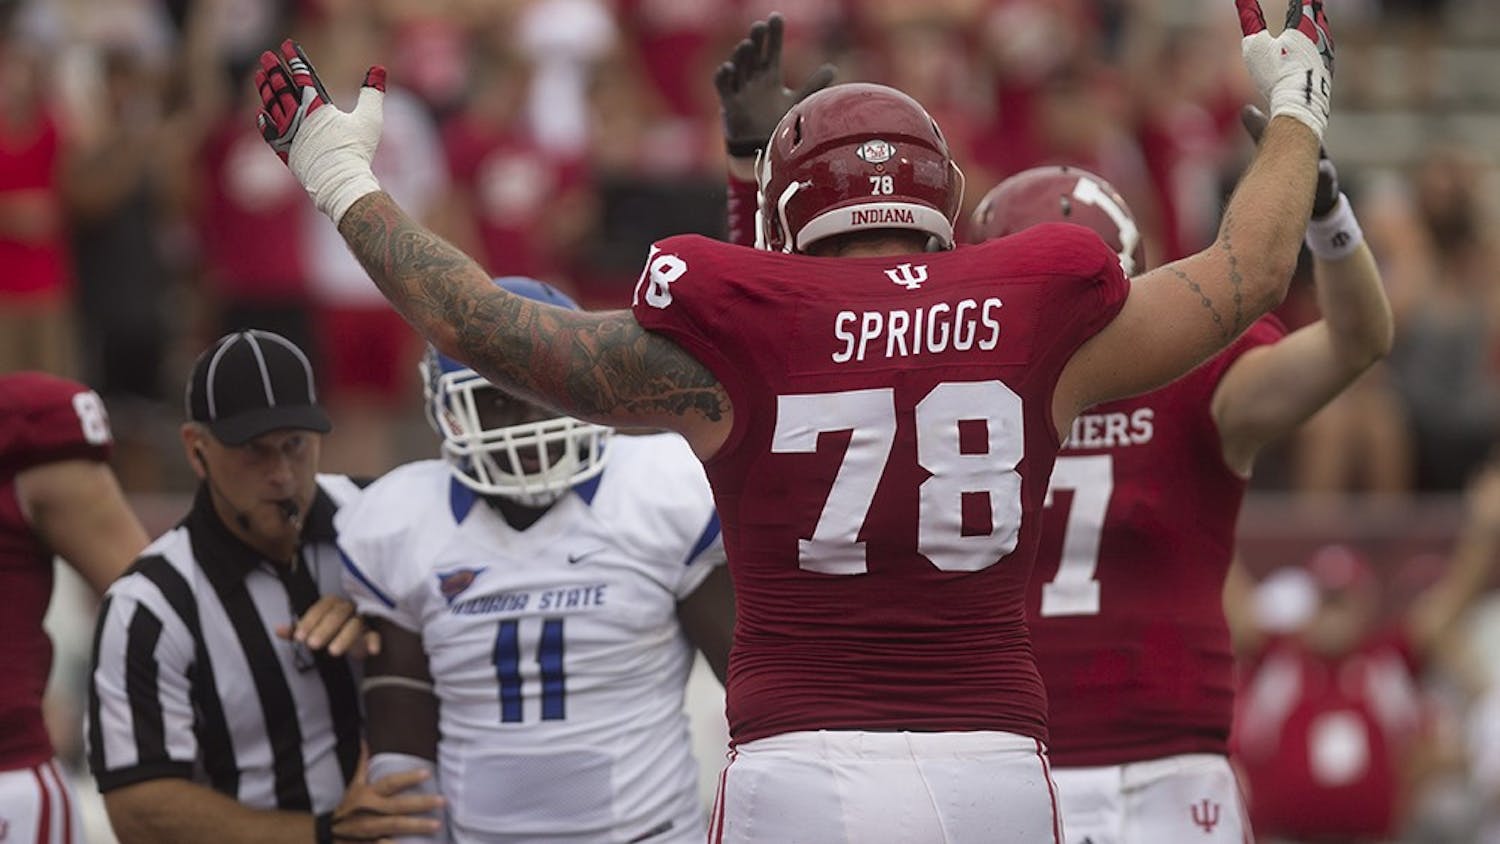 Senior offensive lineman Jason Spriggs celebrates a touchdown during IU's game against Indiana State on Aug. 30, 2014, at Memorial Stadium.